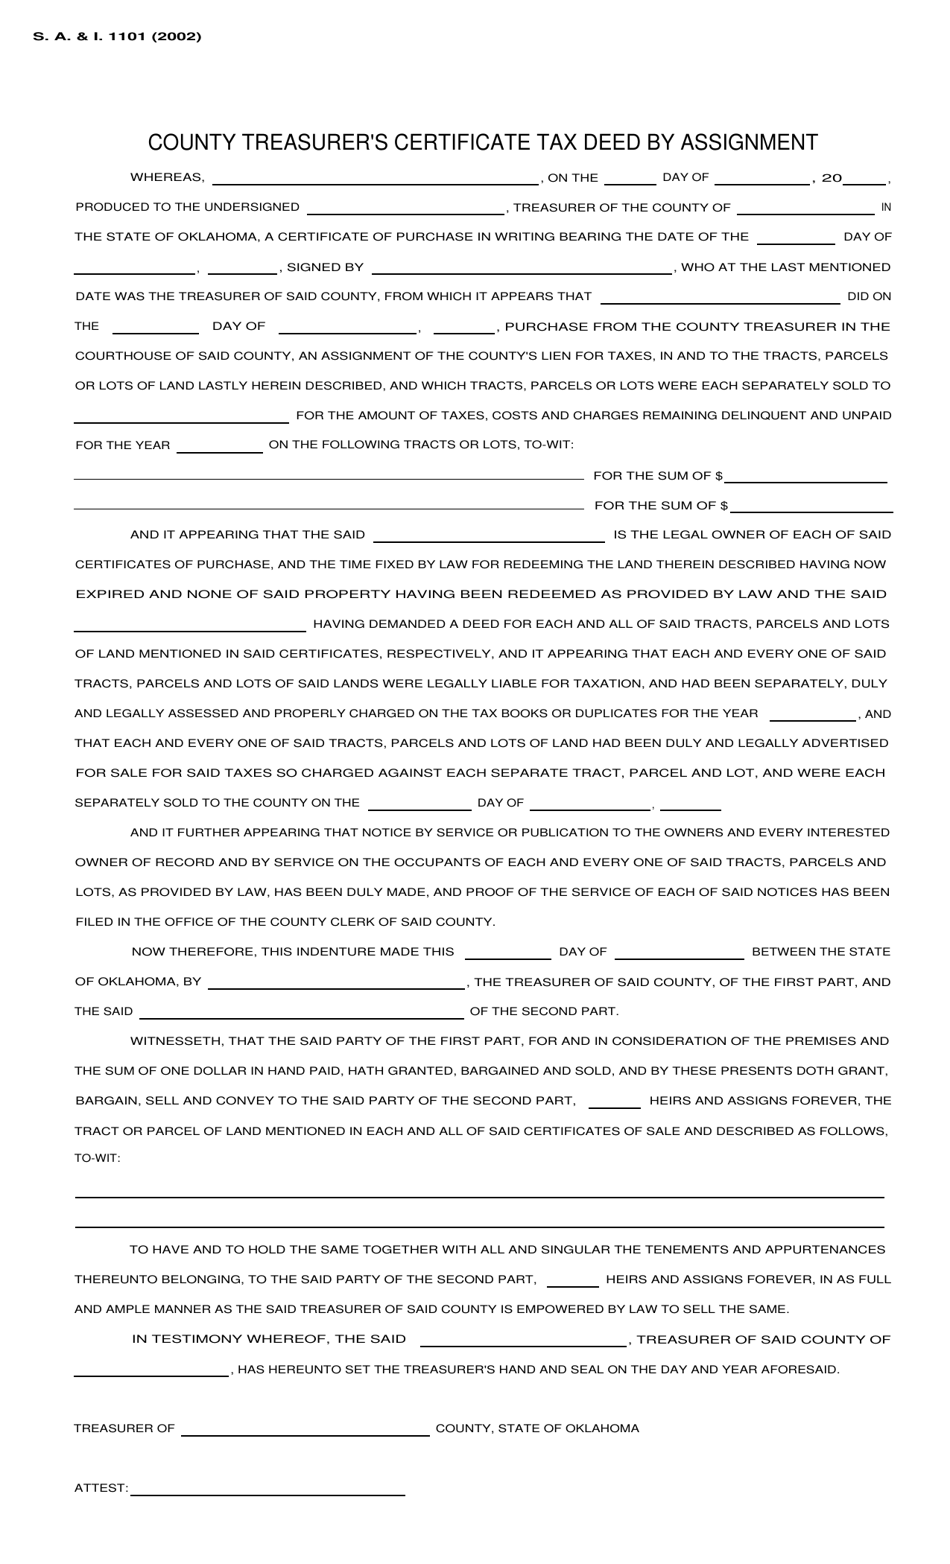 Form S.A. I.1101 County Treasurers Certificate Tax Deed by Assignment - Oklahoma, Page 1